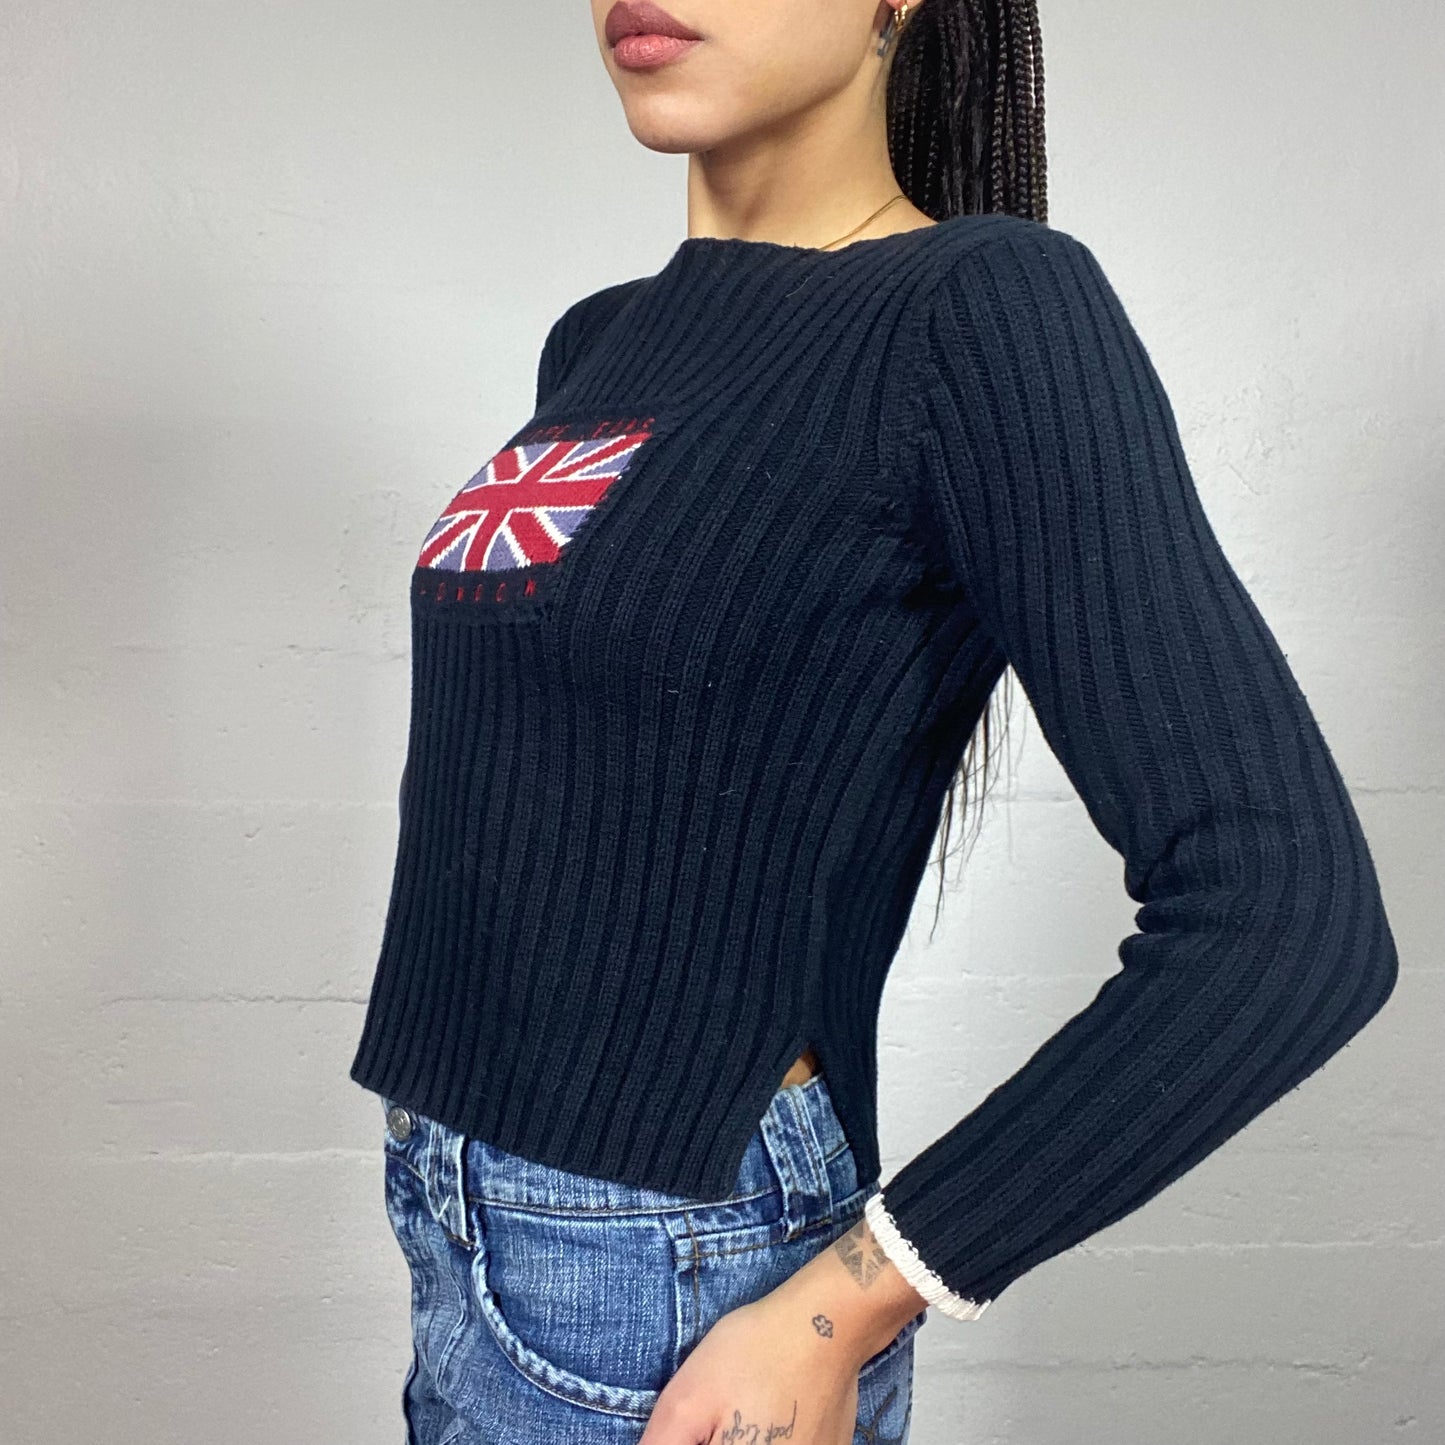 Vintage 2000's Pepe Jeans Black Knit Pullover with Navy Brand UK Flag Detail (S)